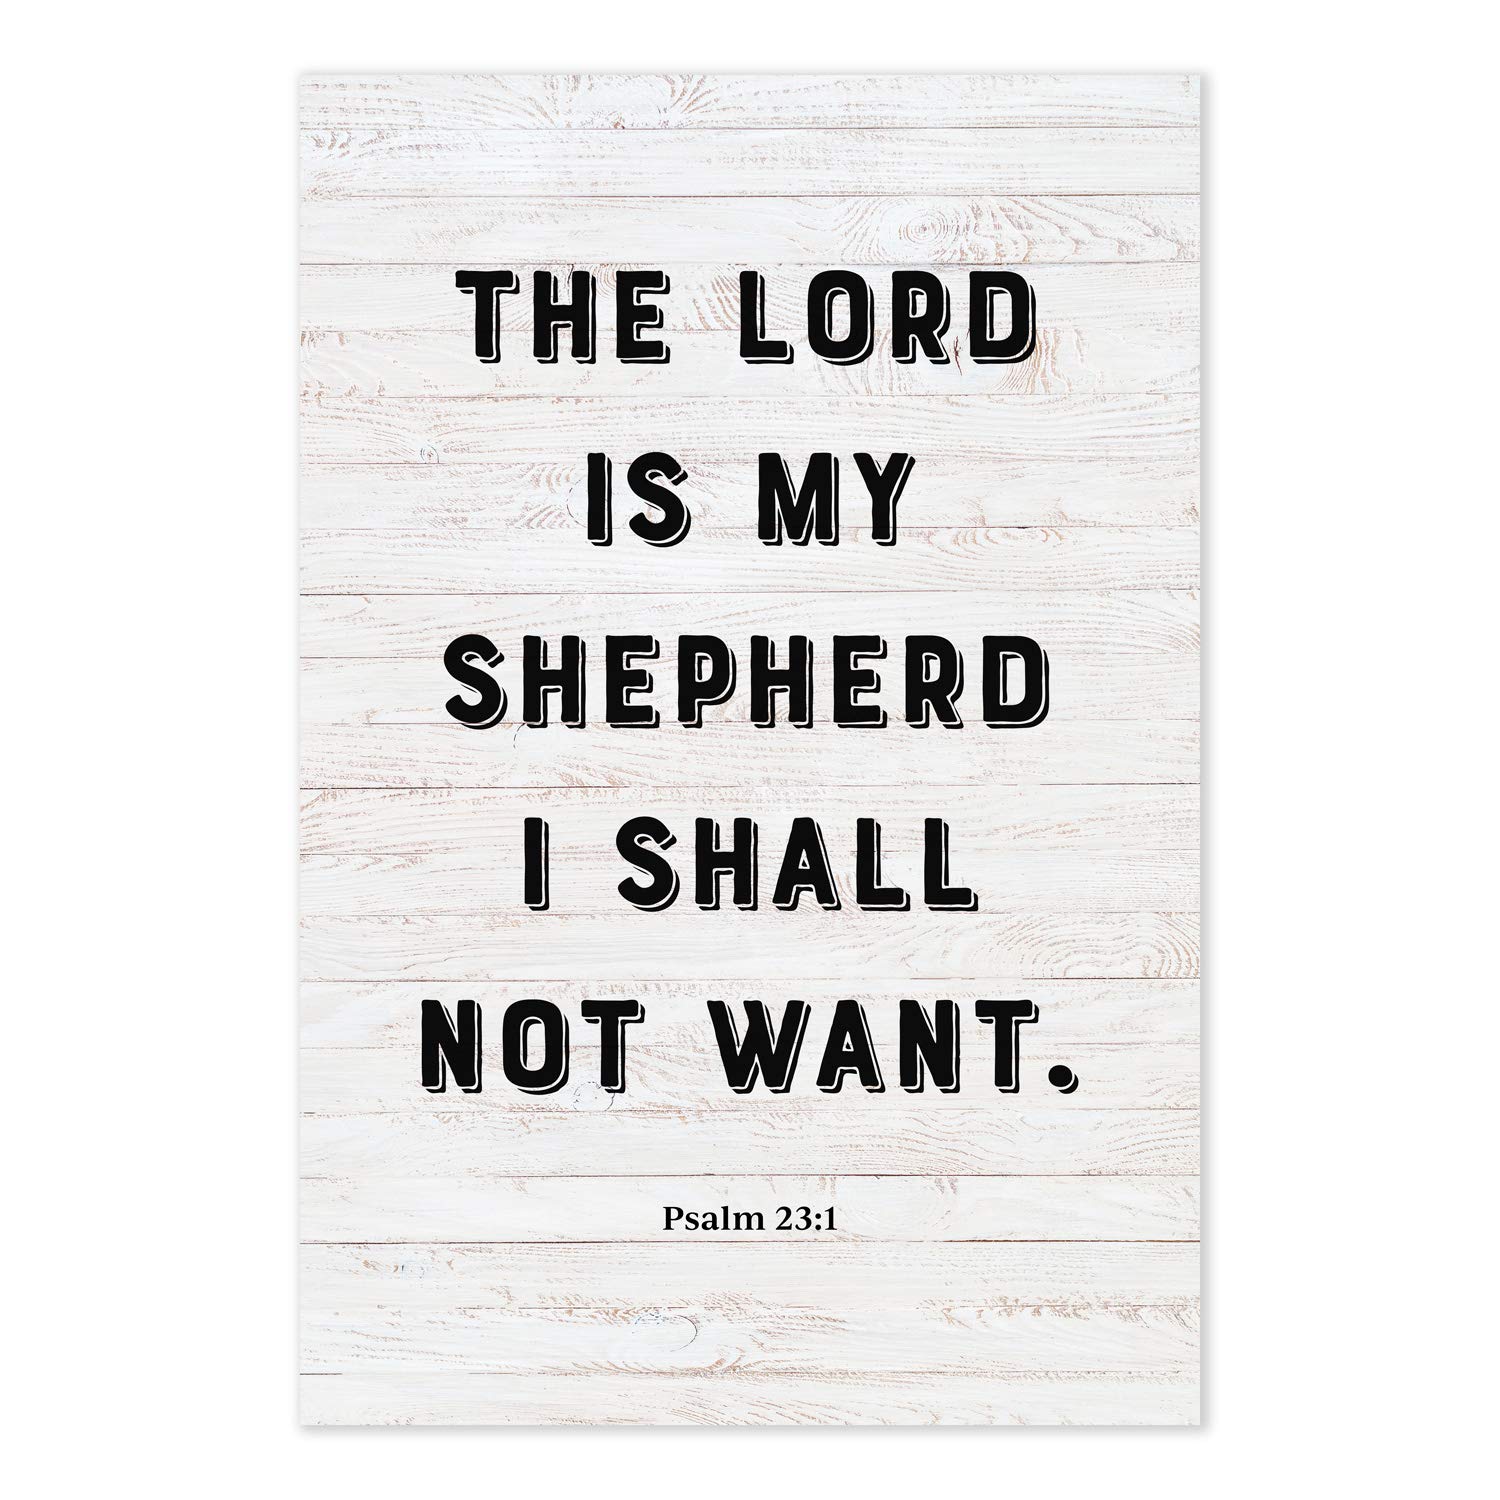 The Lord Is My Shepherd I Shall Not Want Poster Verse Psalm 23:1 Art Print, Handmade Products